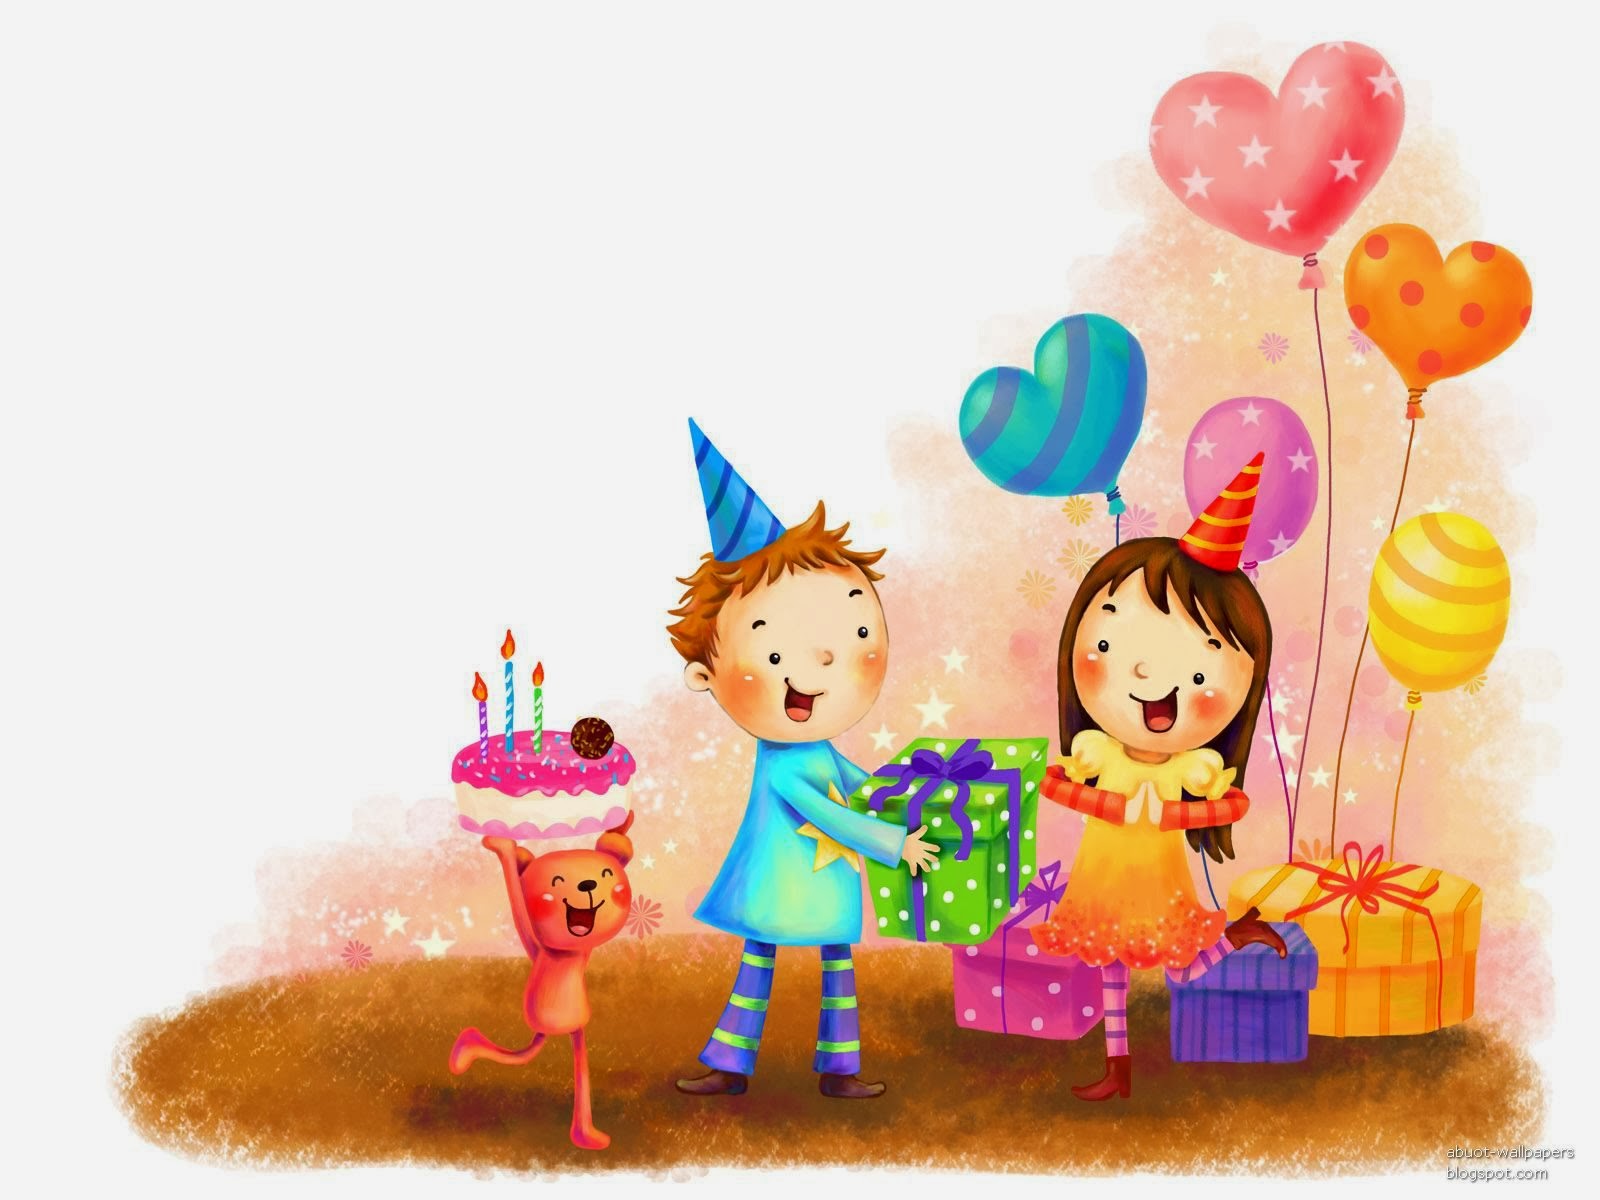 Cute Happy Birthday Heart Greetings Cards to wish Birthday to kids | about wallpapers